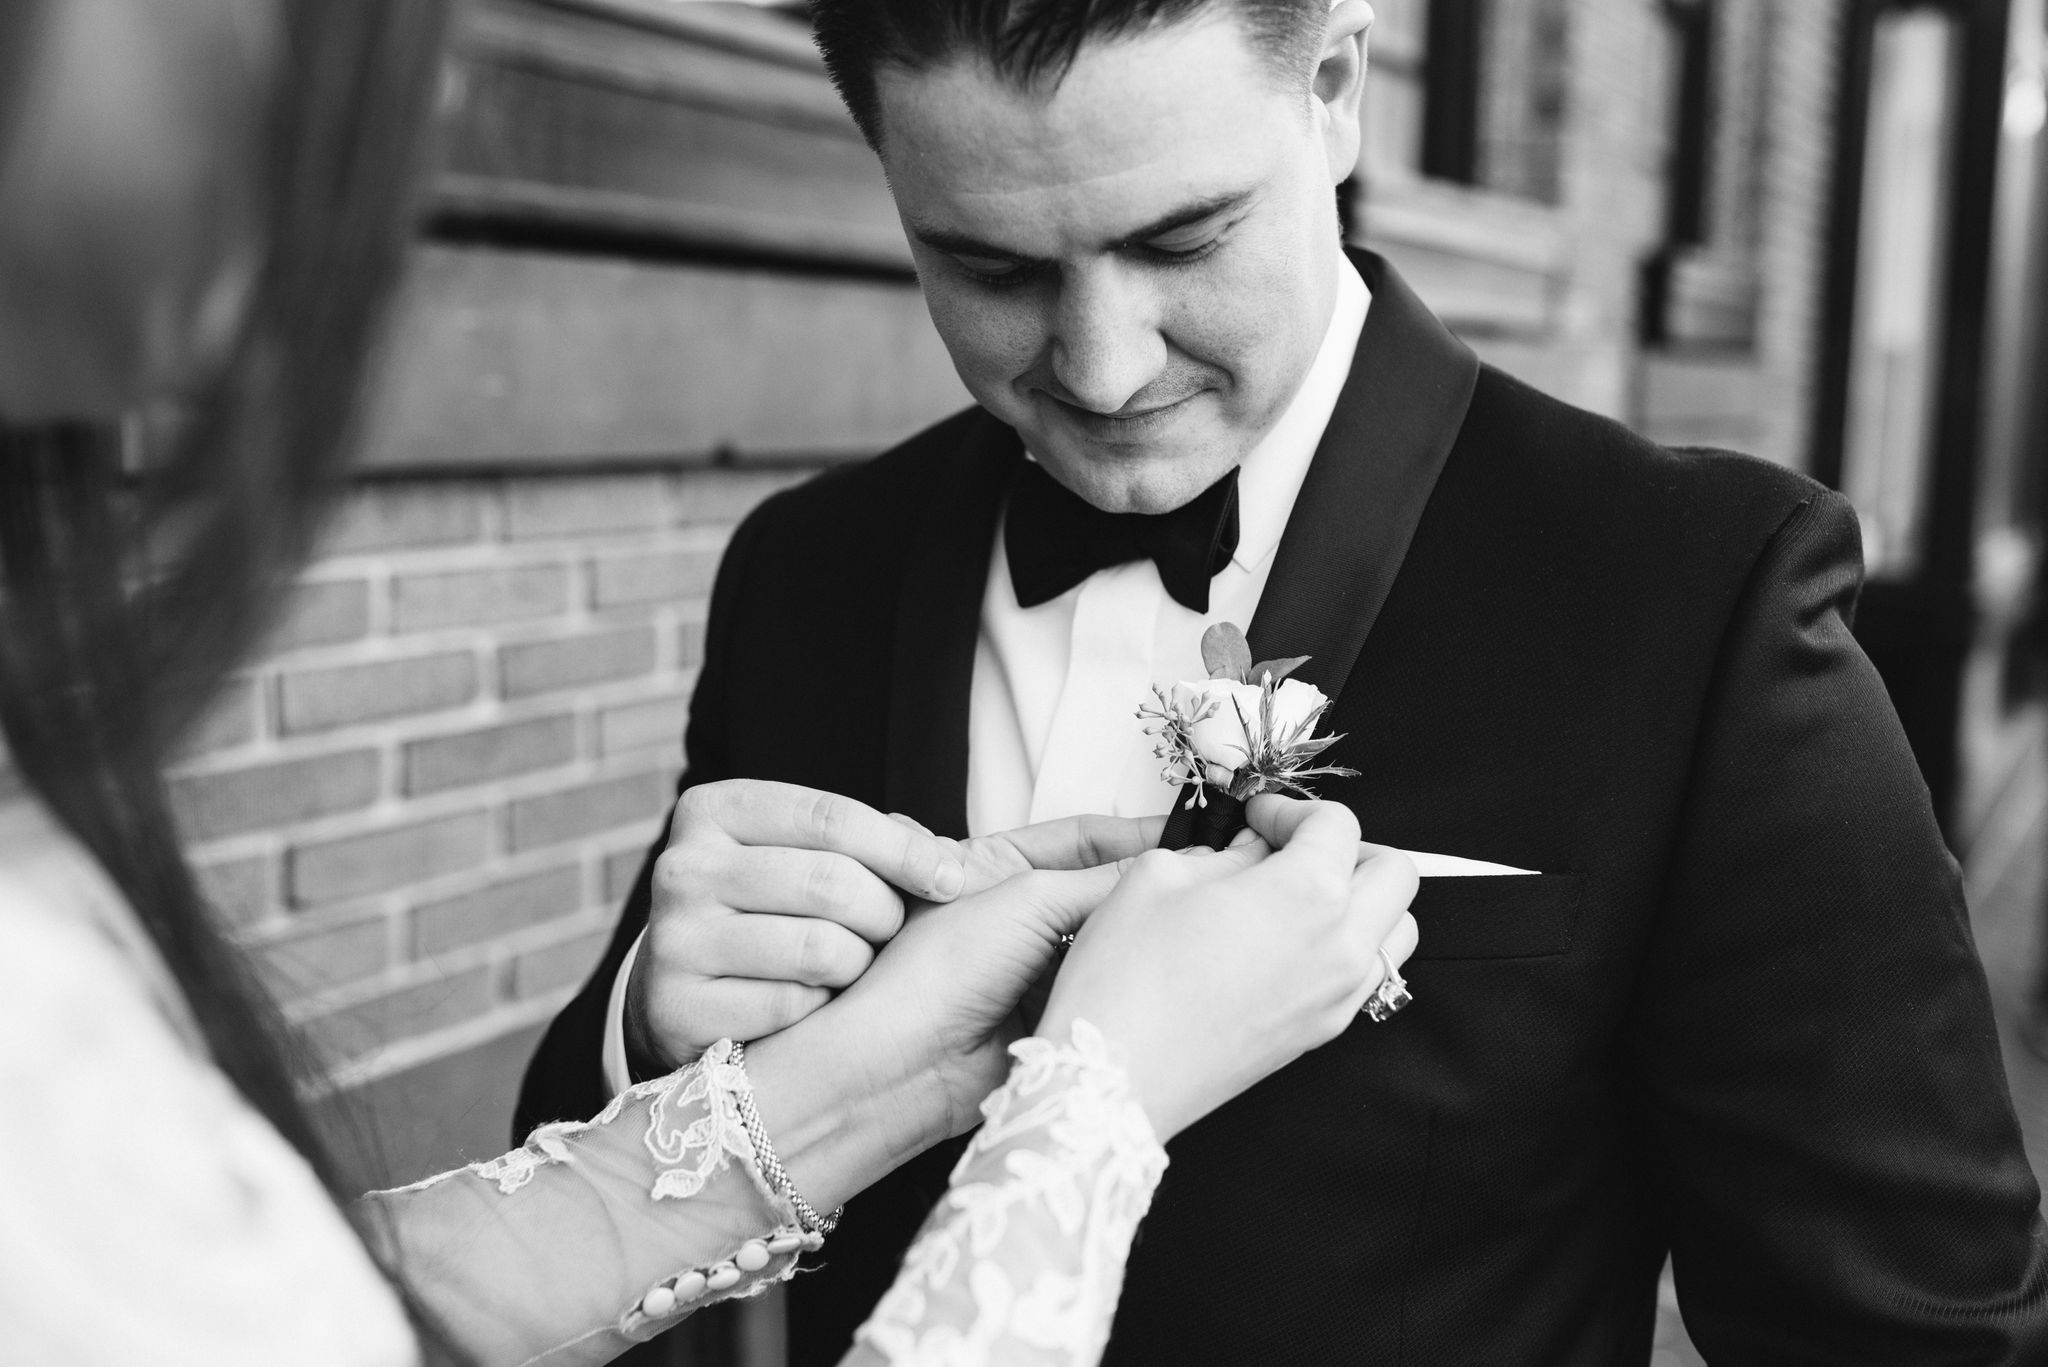  Baltimore, Fells Point, Maryland Wedding Photographer, Winter Wedding, Historic, Classic, Vintage, Bride Pinning Boutonniere on Groom, Black and White Photo 